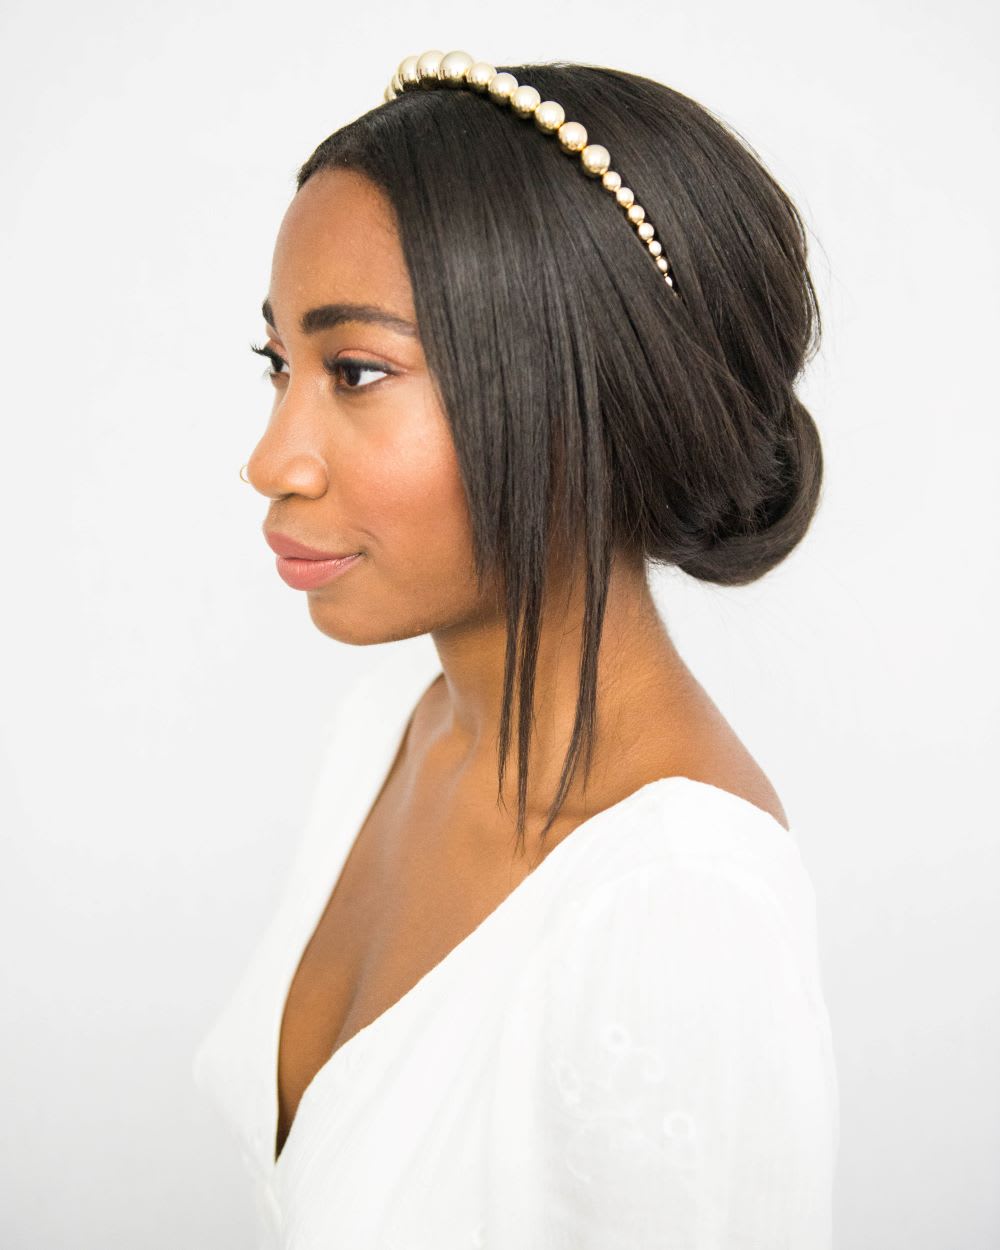 Headband Hairstyles For Brides An Easy Low Updo Perfect For